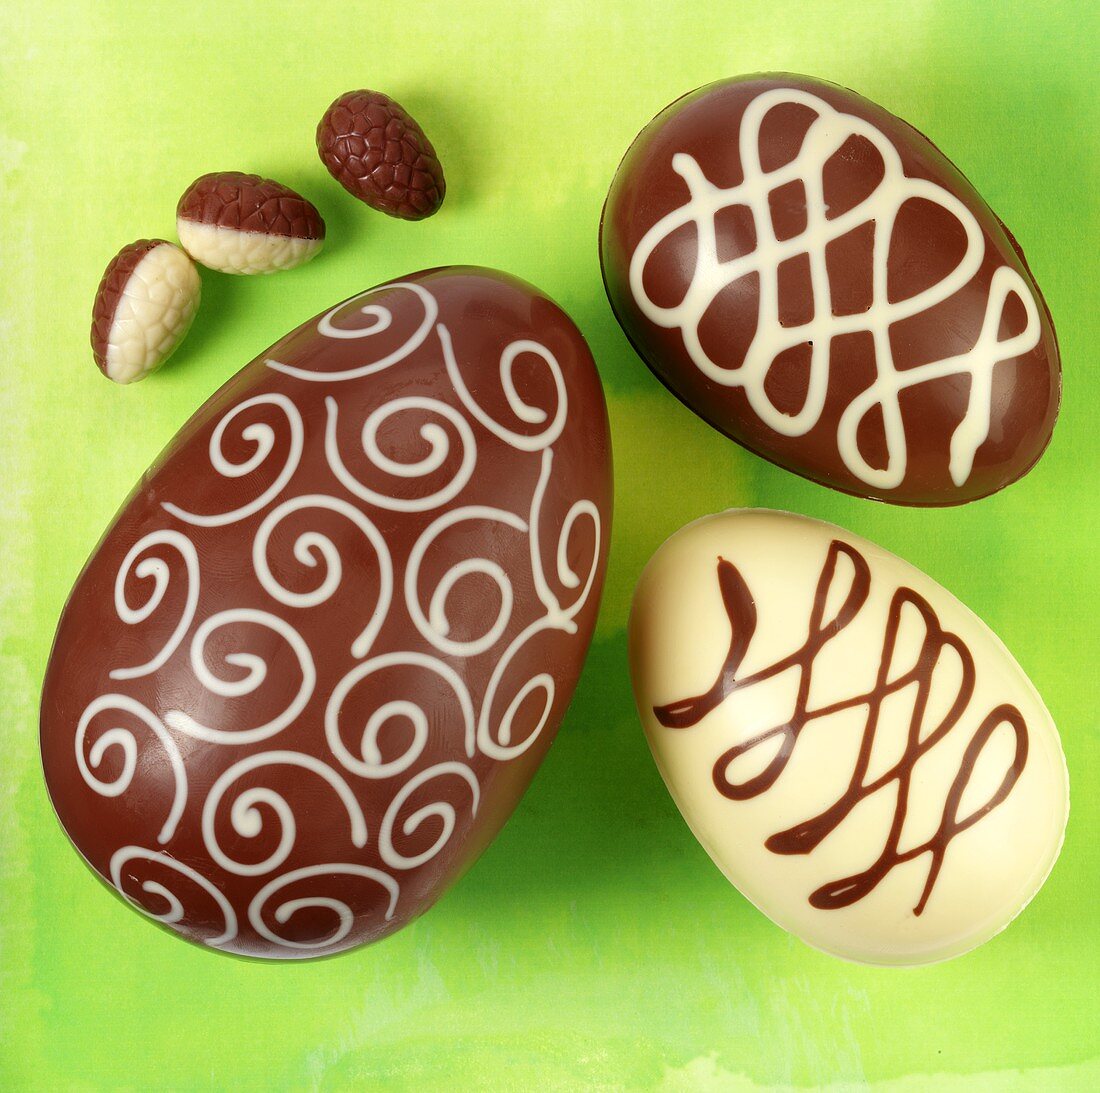 Large and small chocolate Easter eggs